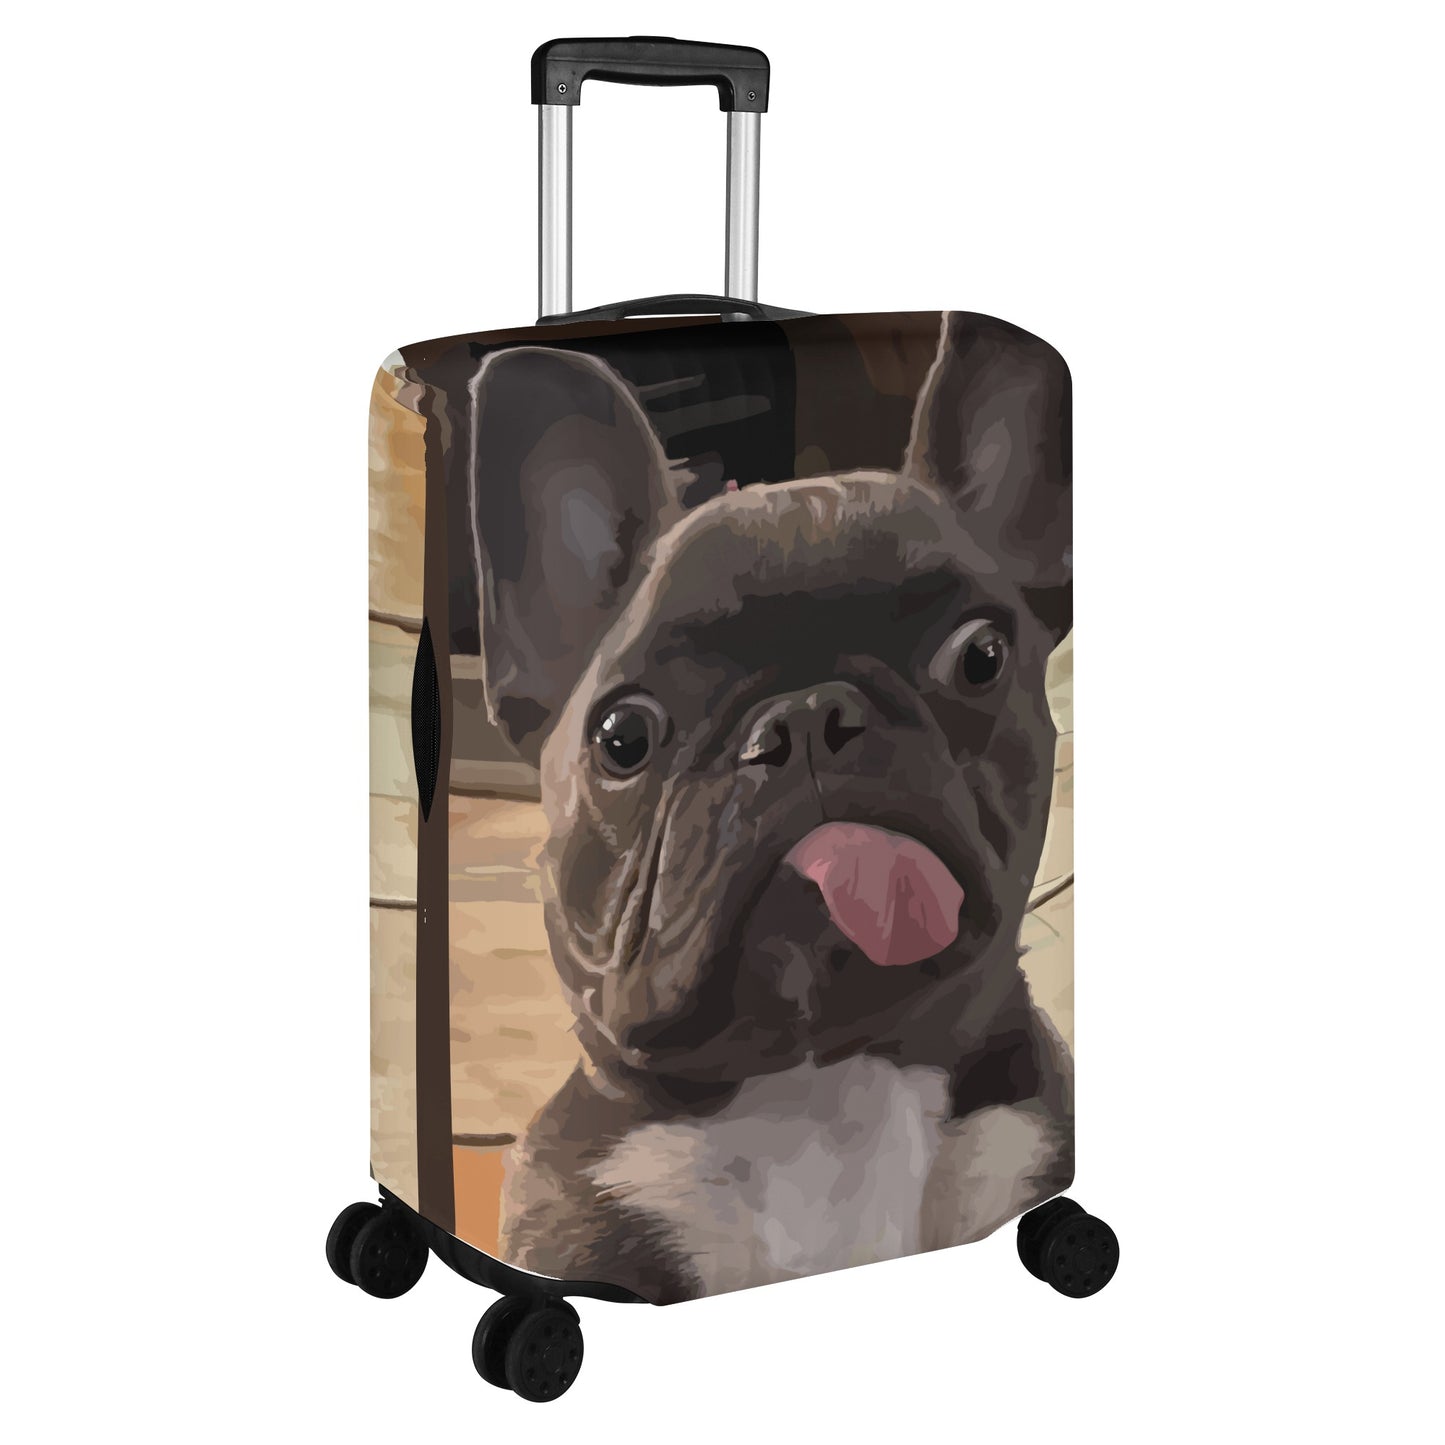 Molly  - Luggage Cover